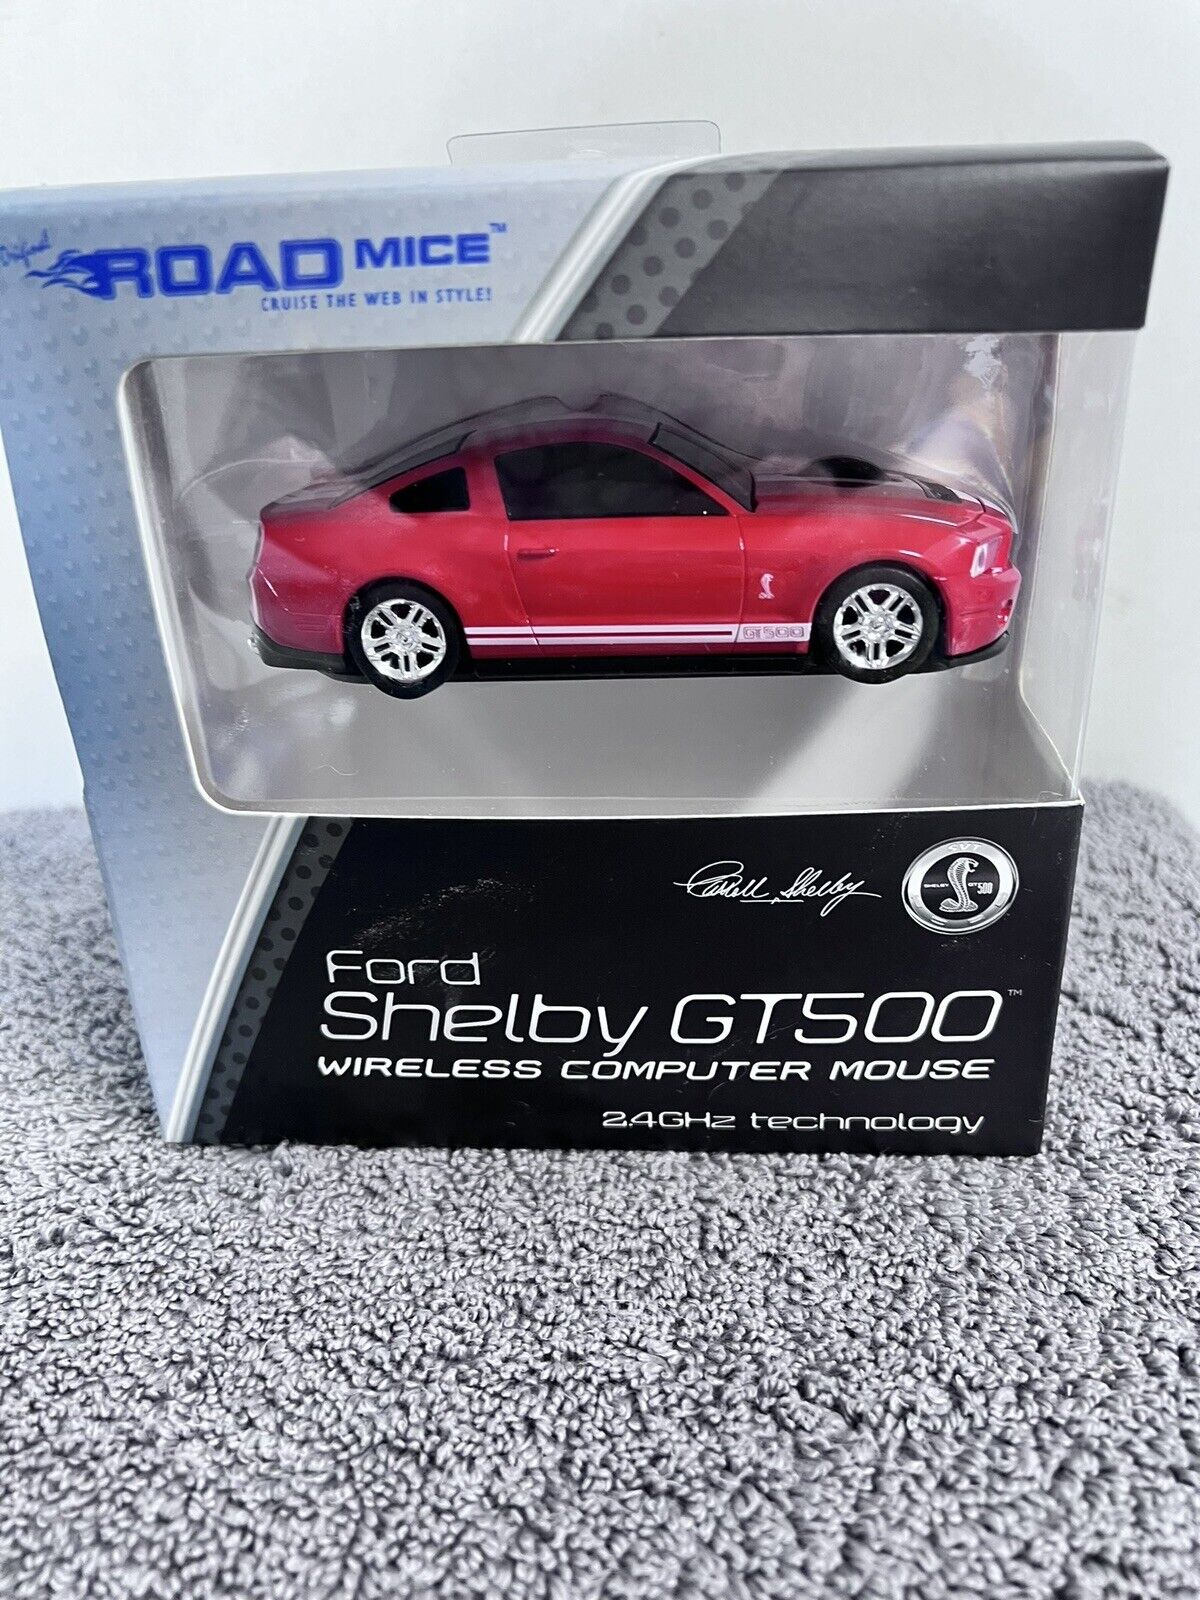 Original Road Mice Red Ford Shelby GT500 Gift Wireless Computer Mouse headlights